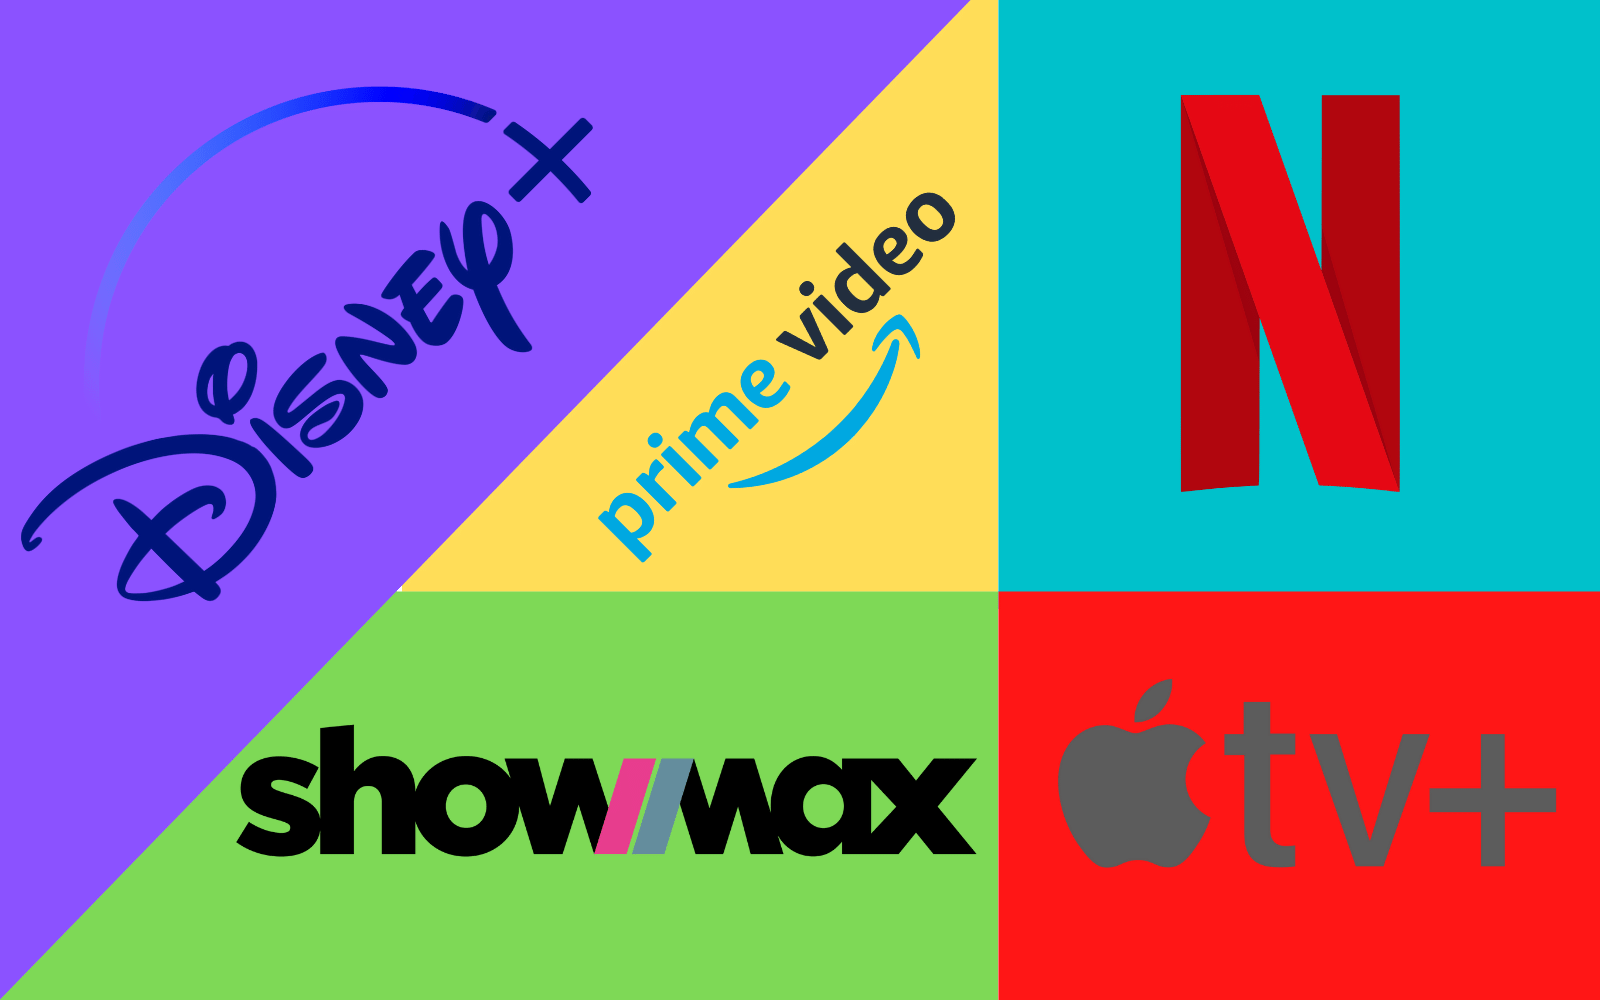 What to watch on Netflix and Showmax this weekend